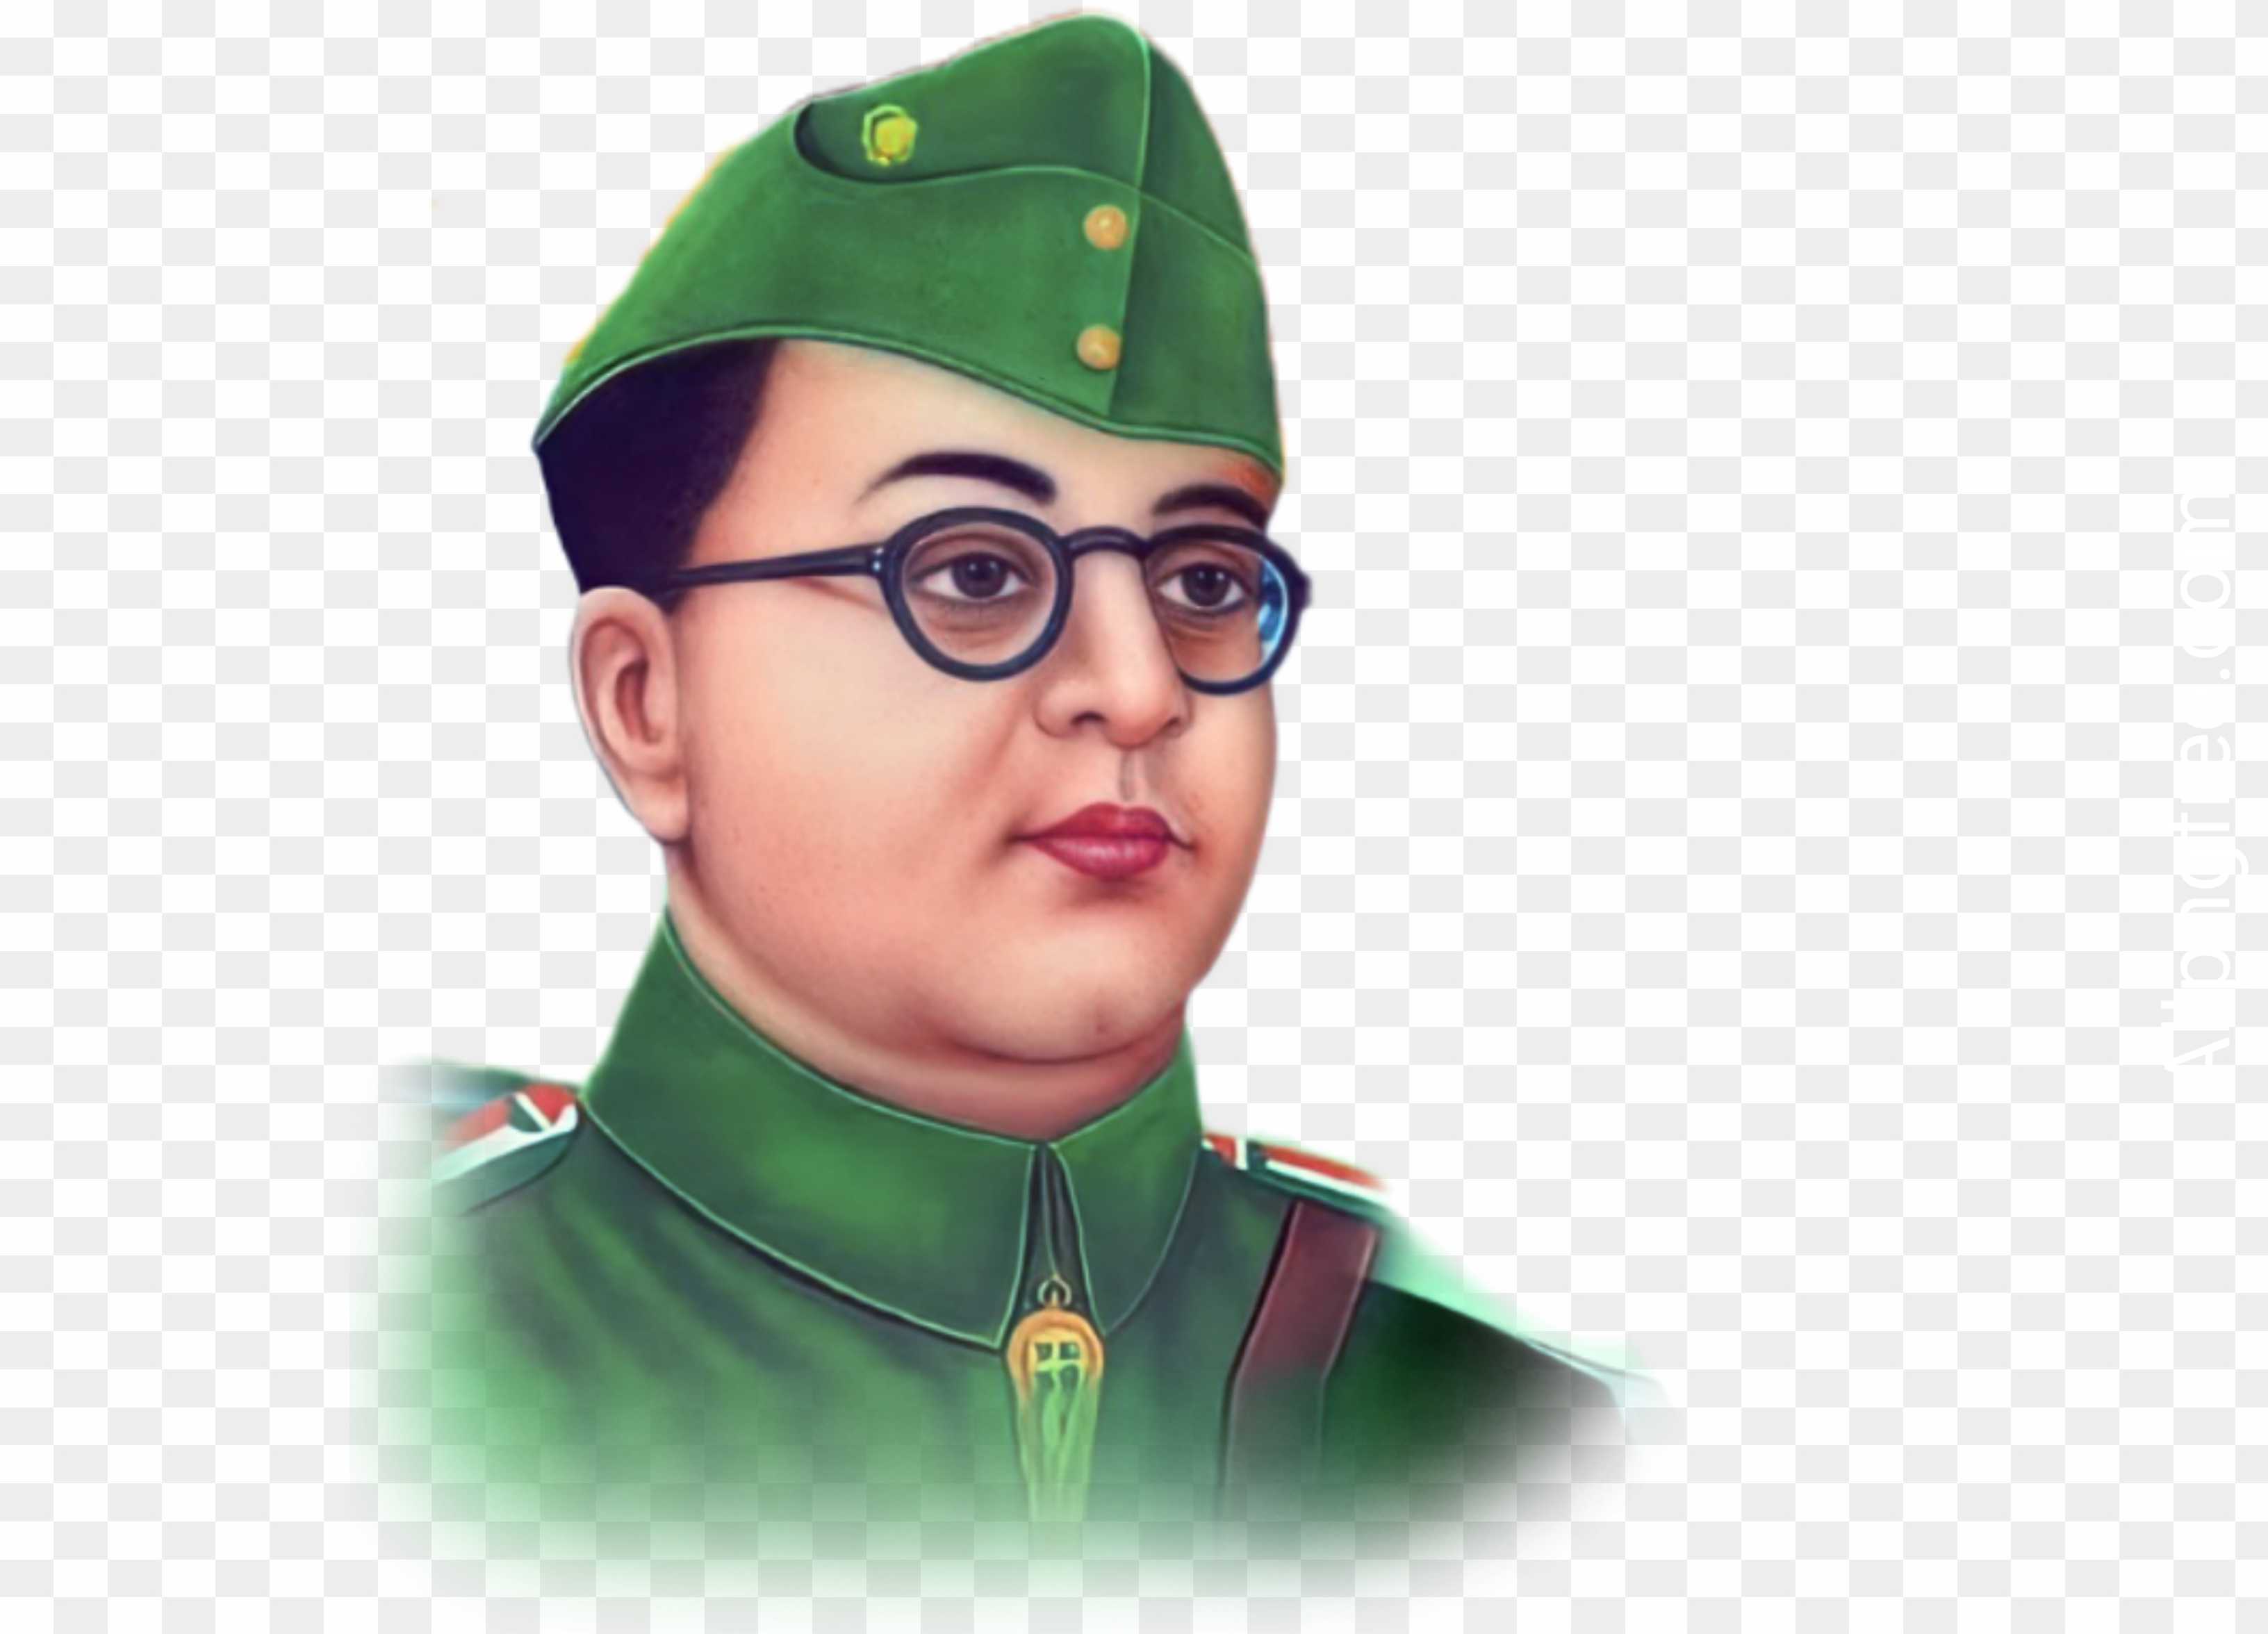 Subhas Chandra Bose png images download